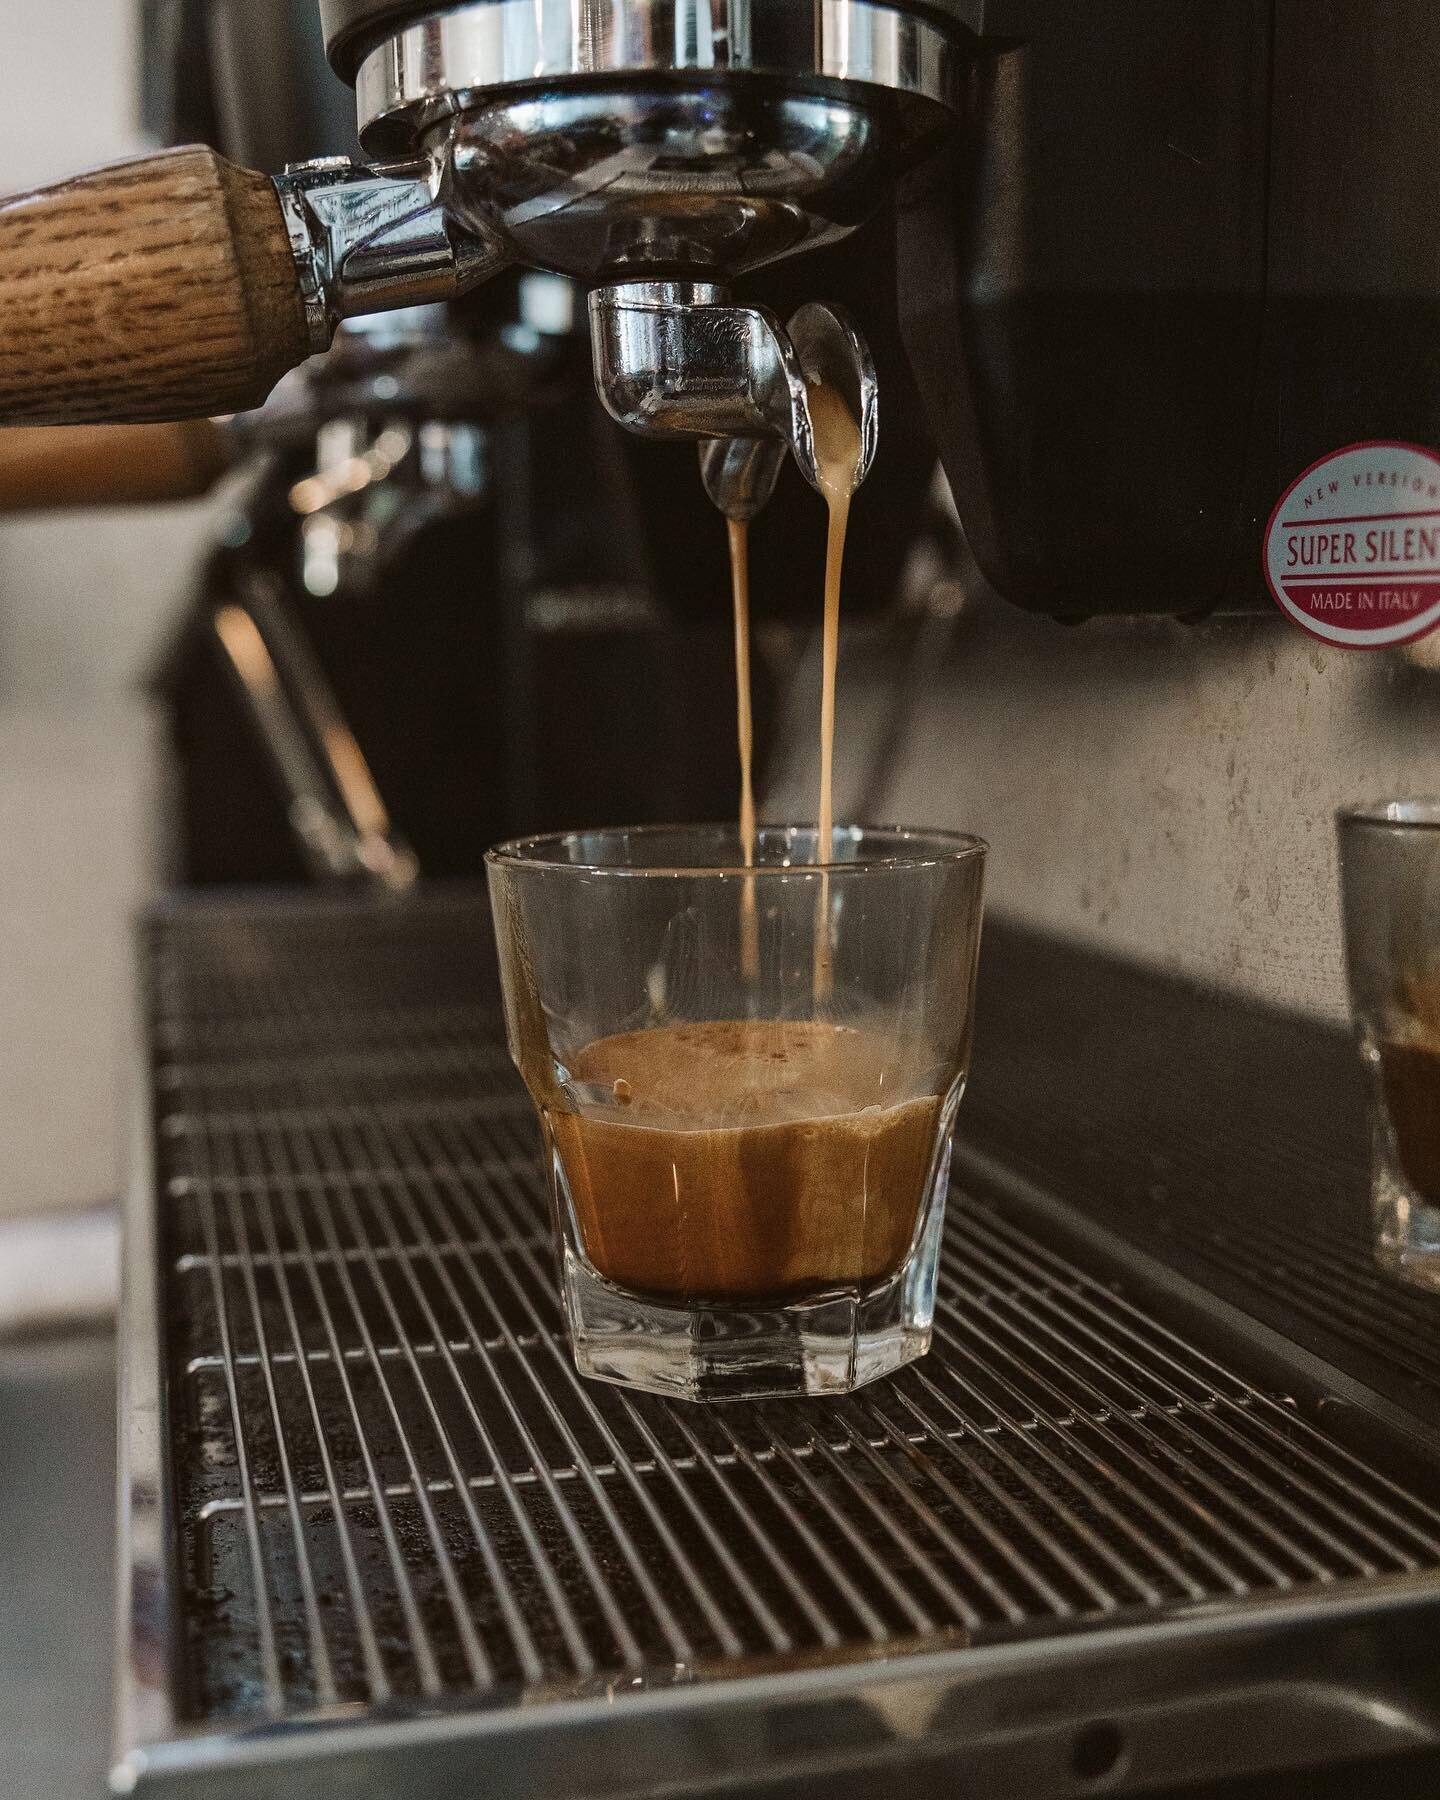 Elevate the weekend 👌🏼☕️🍪

We added 20+ Craft Cooler options yesterday. Come build your own 6 Mix Pack!

Open till 5pm #DoGoodThings

📷: @benjaminnicholasphotography